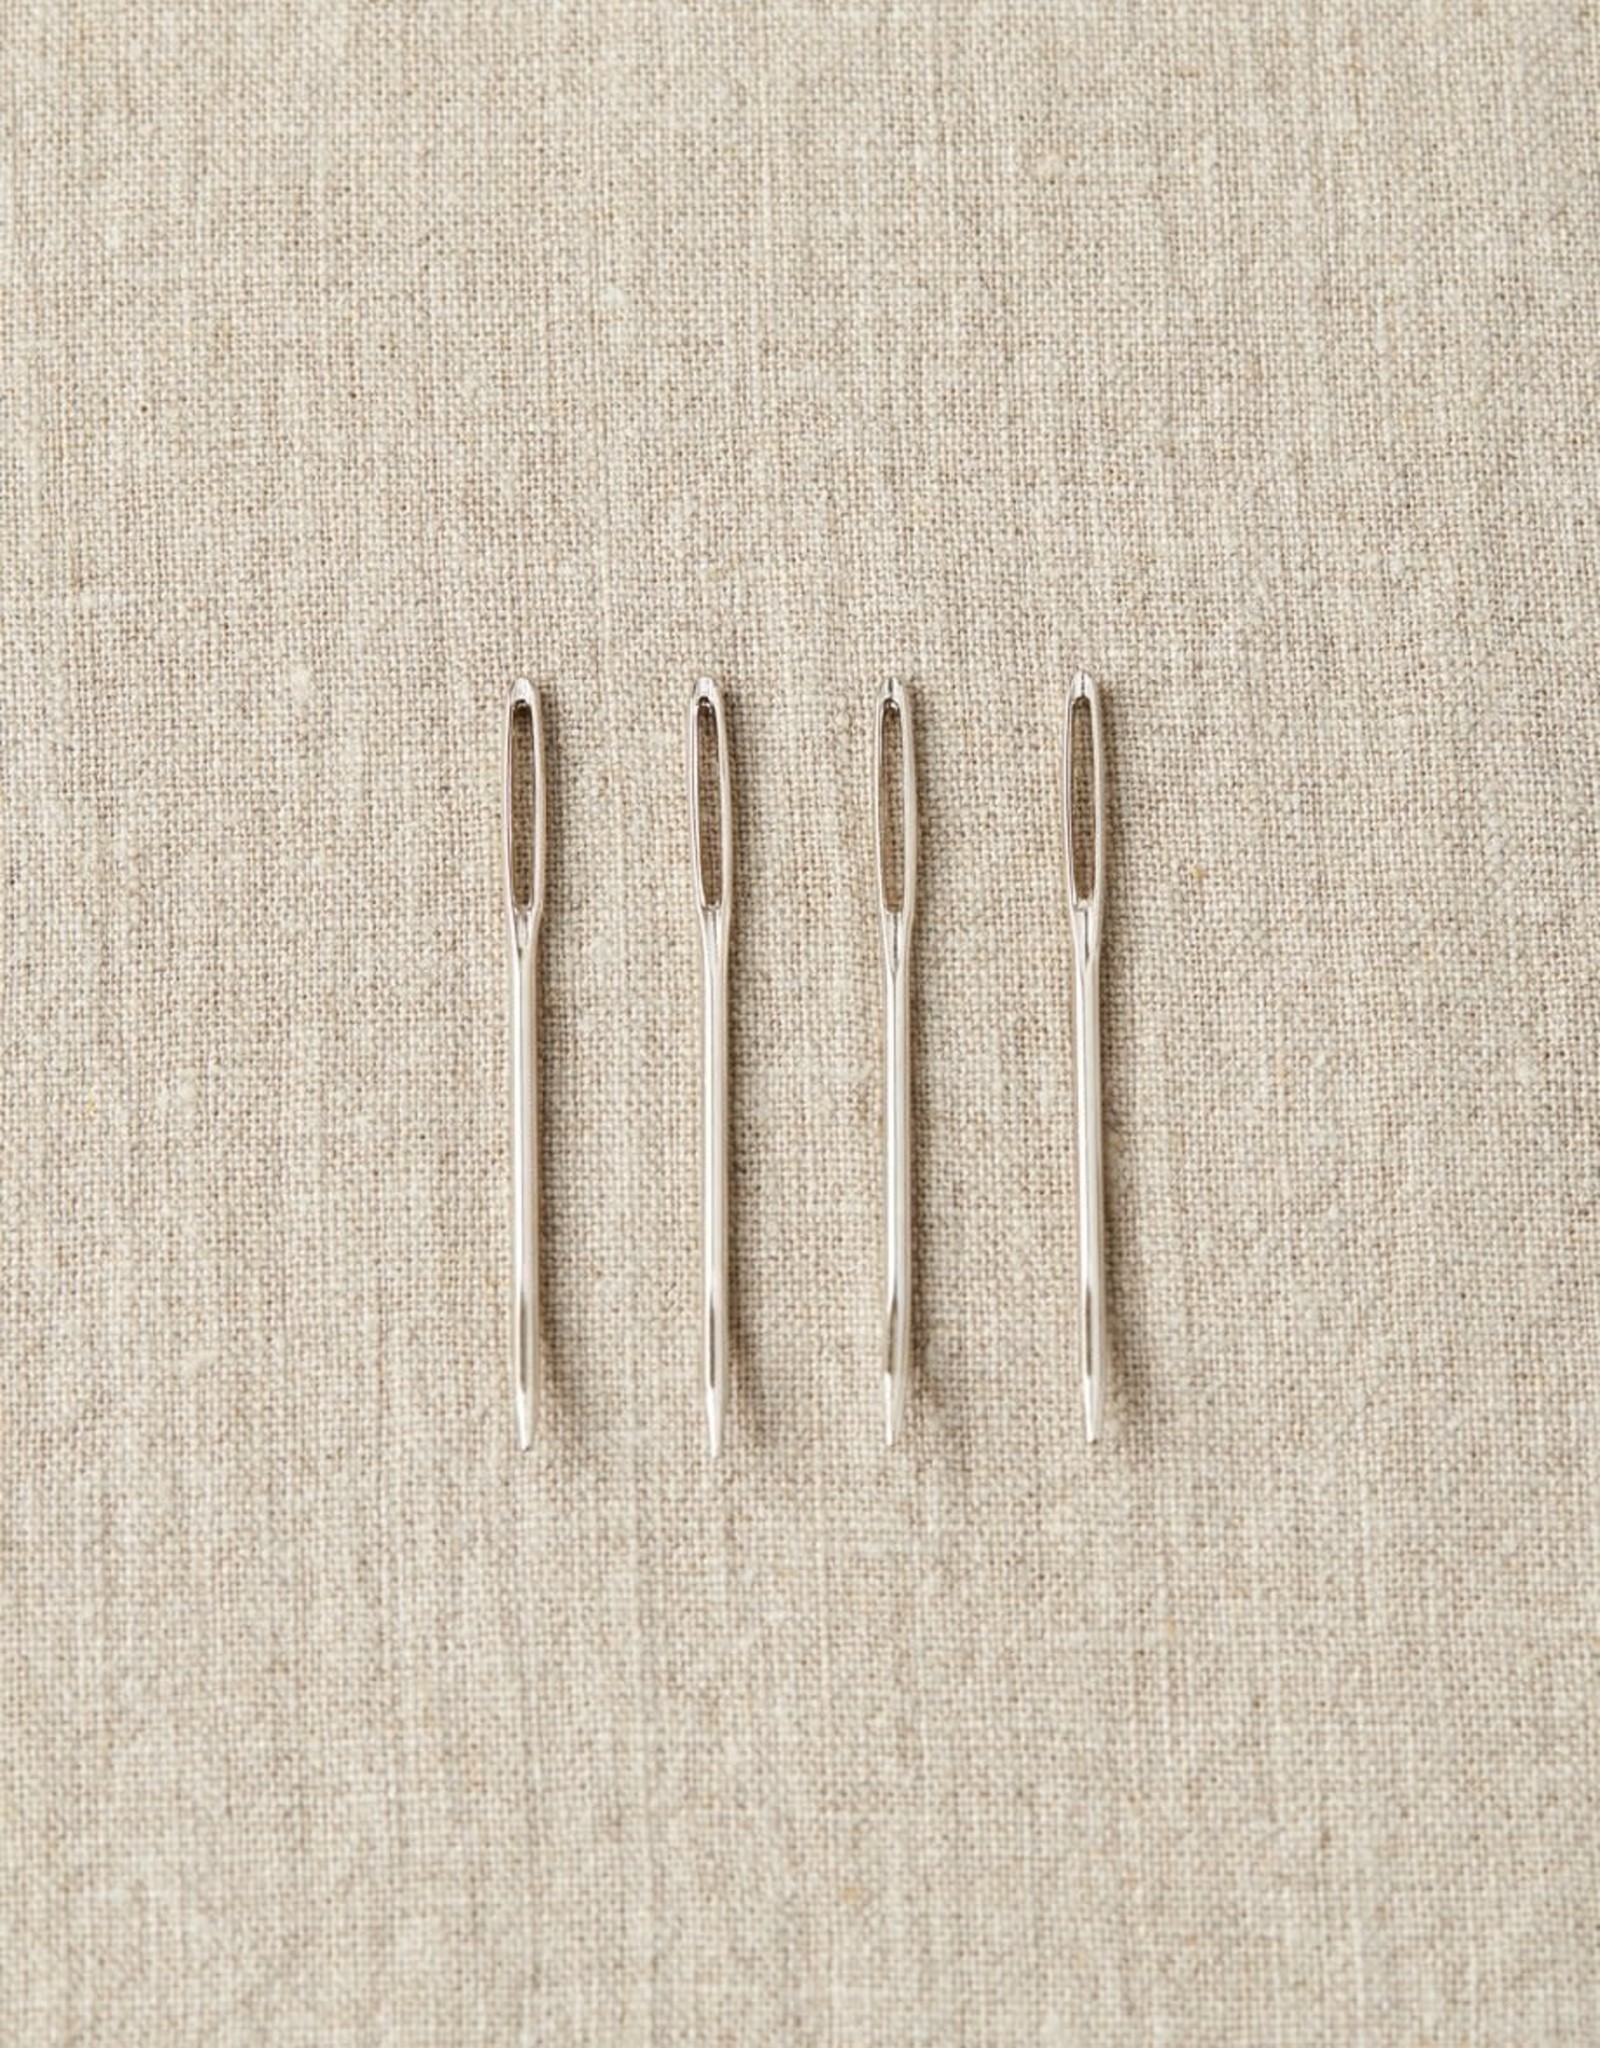 Cocoknits Tapestry Needles by Cocoknits